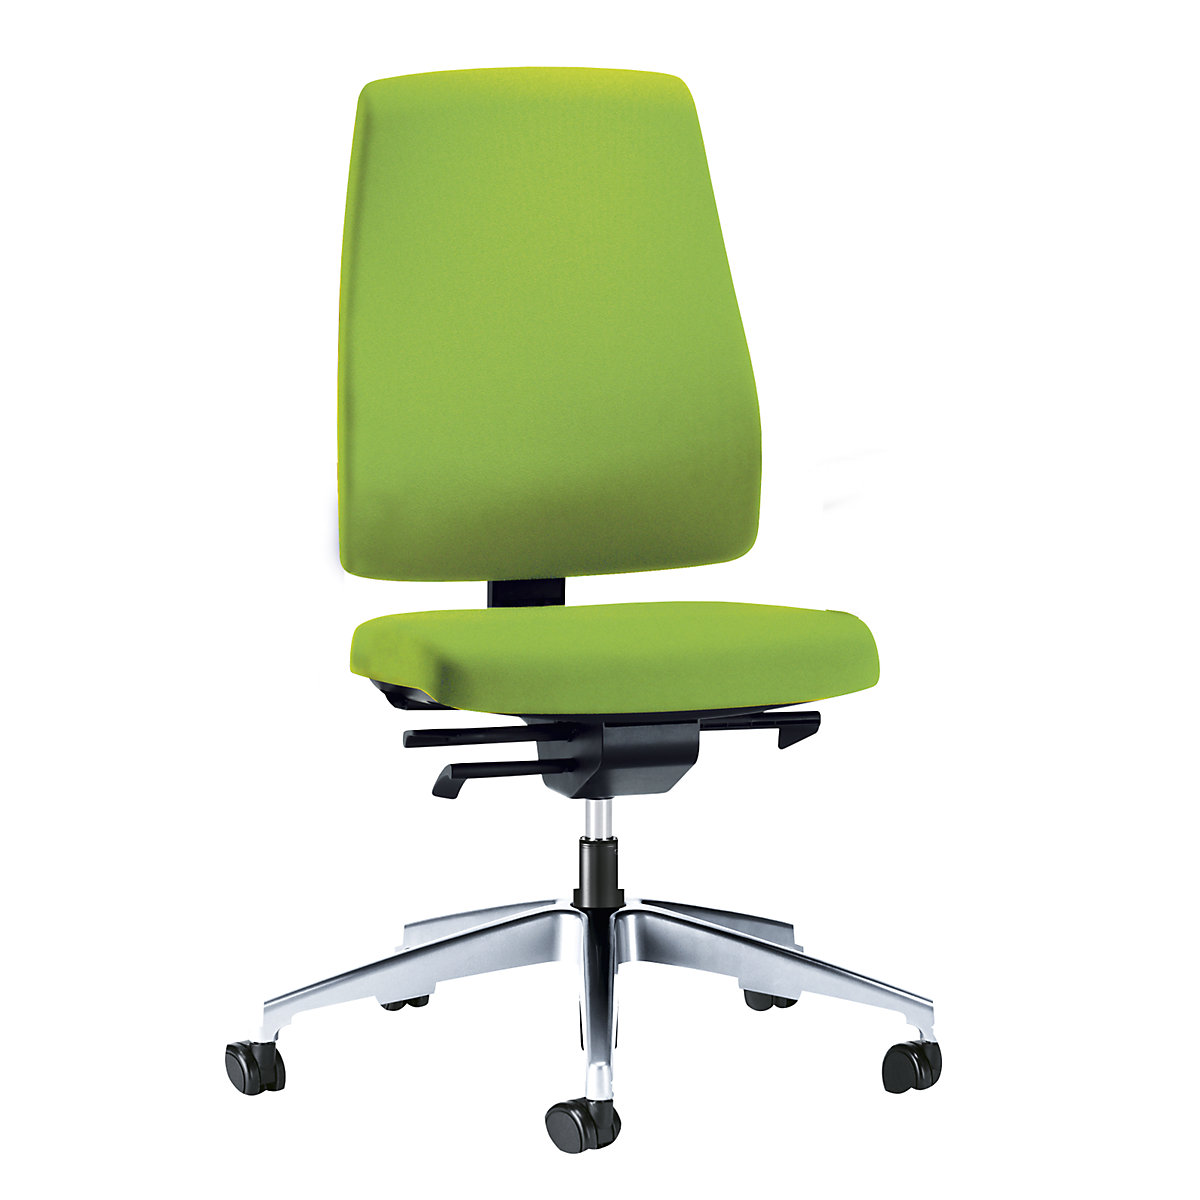 GOAL office swivel chair, back rest height 530 mm – interstuhl, polished frame, with hard castors, yellow green, seat depth 410 mm-5